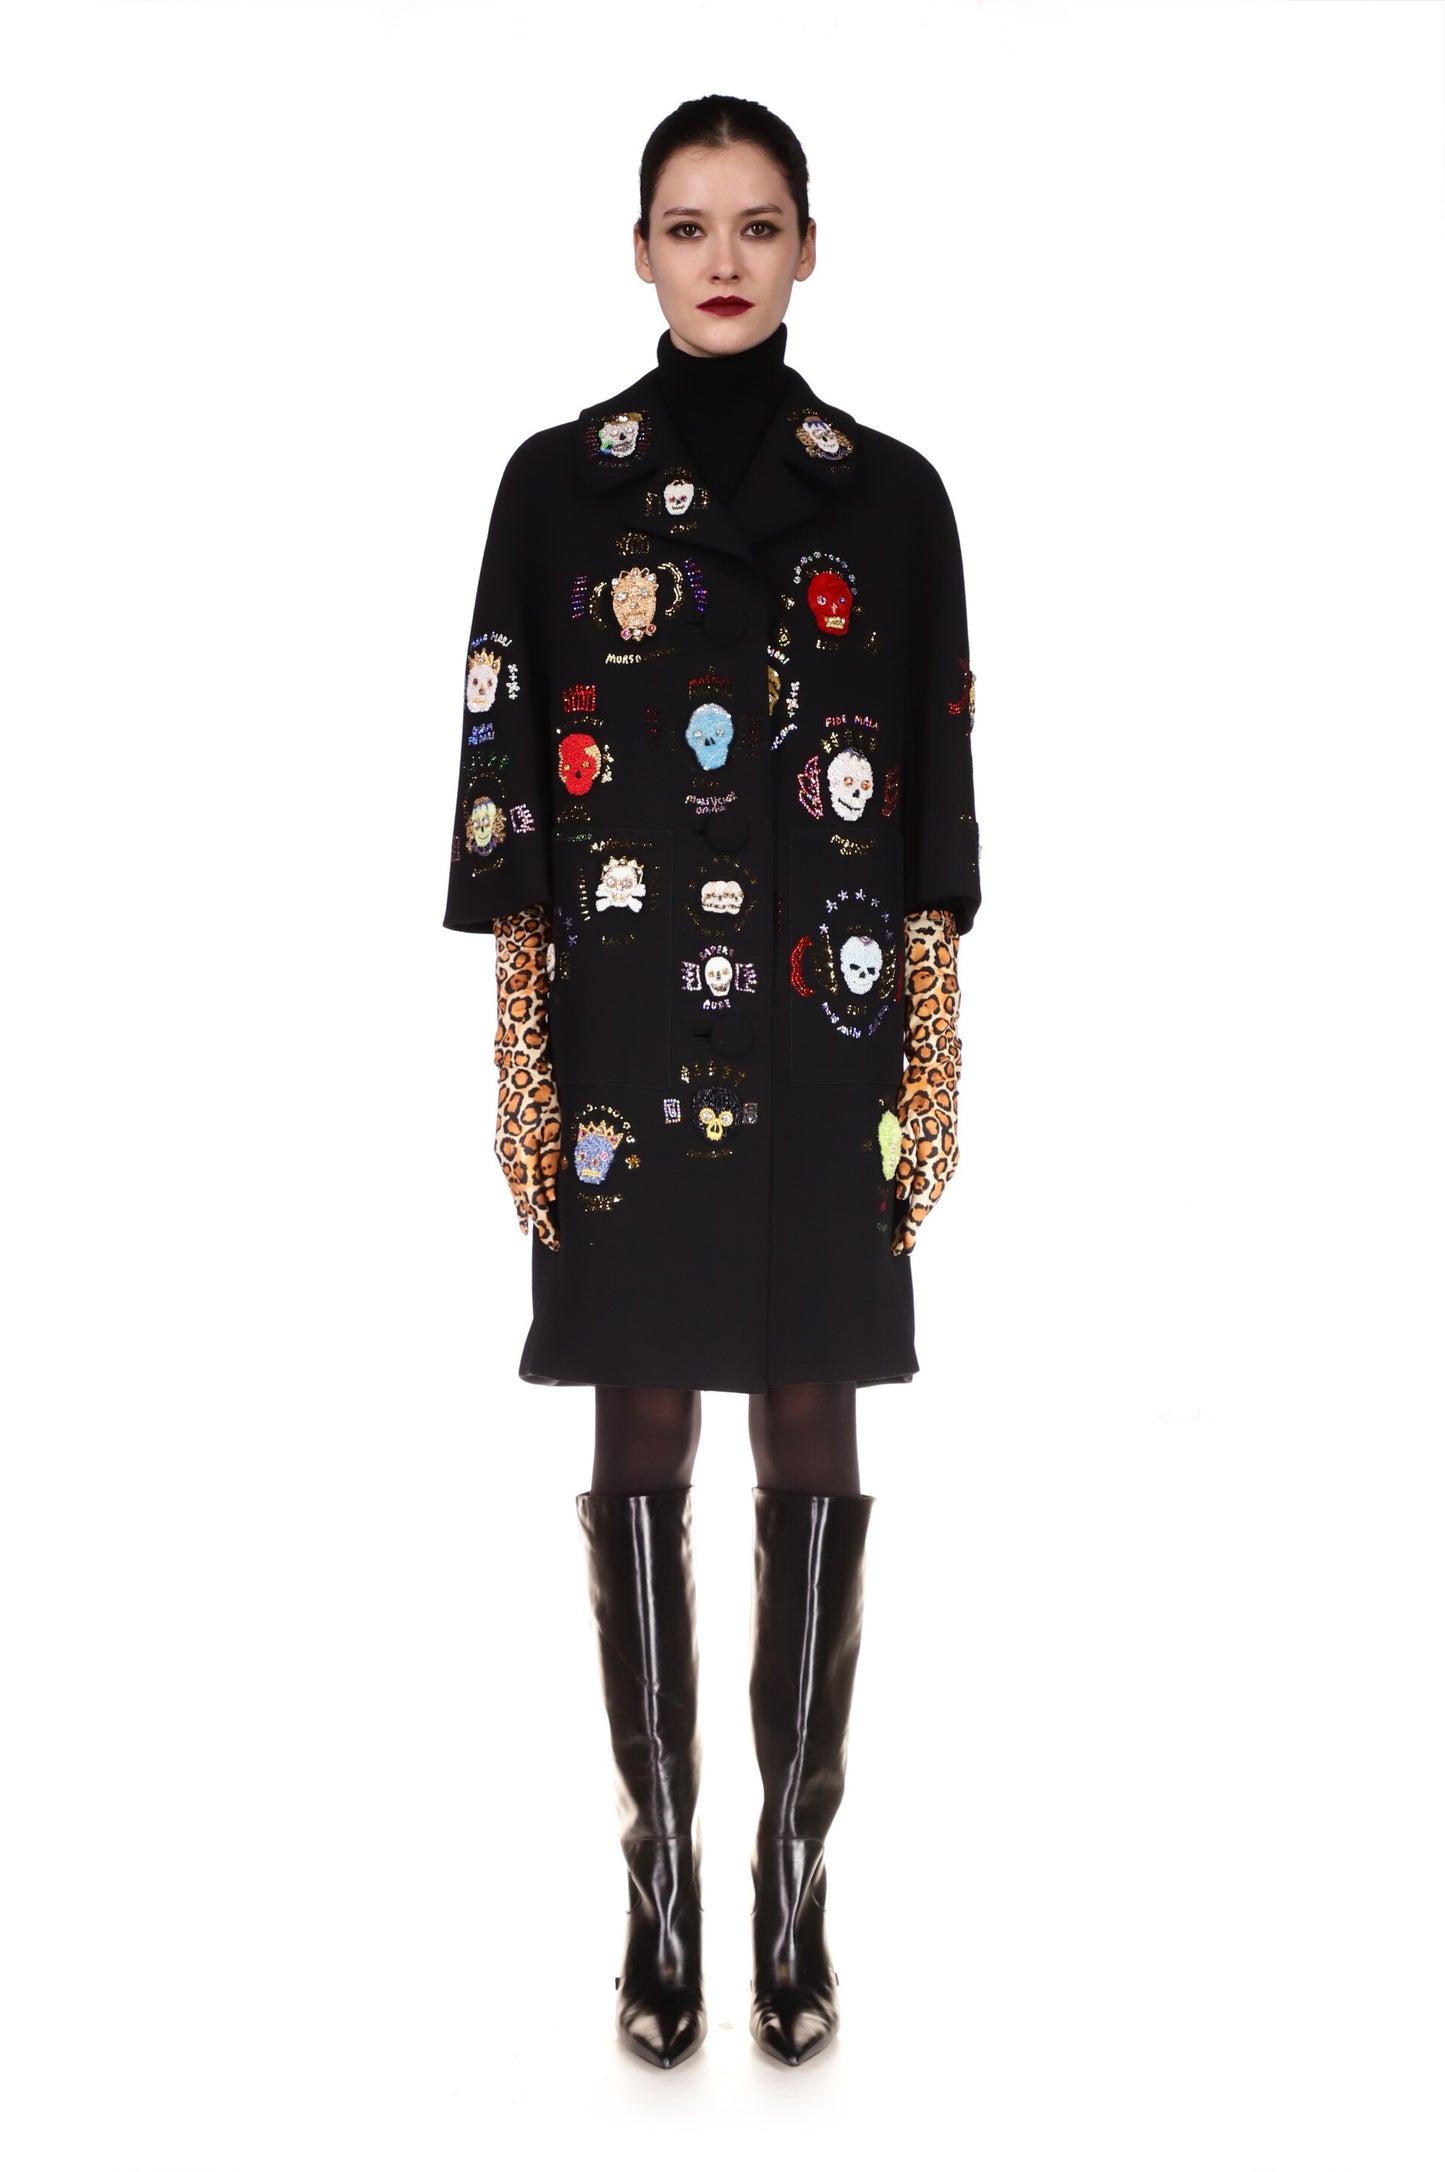 'WE ARE MADE OF STARS' PATCH POCKET COAT - COATS - Libertine